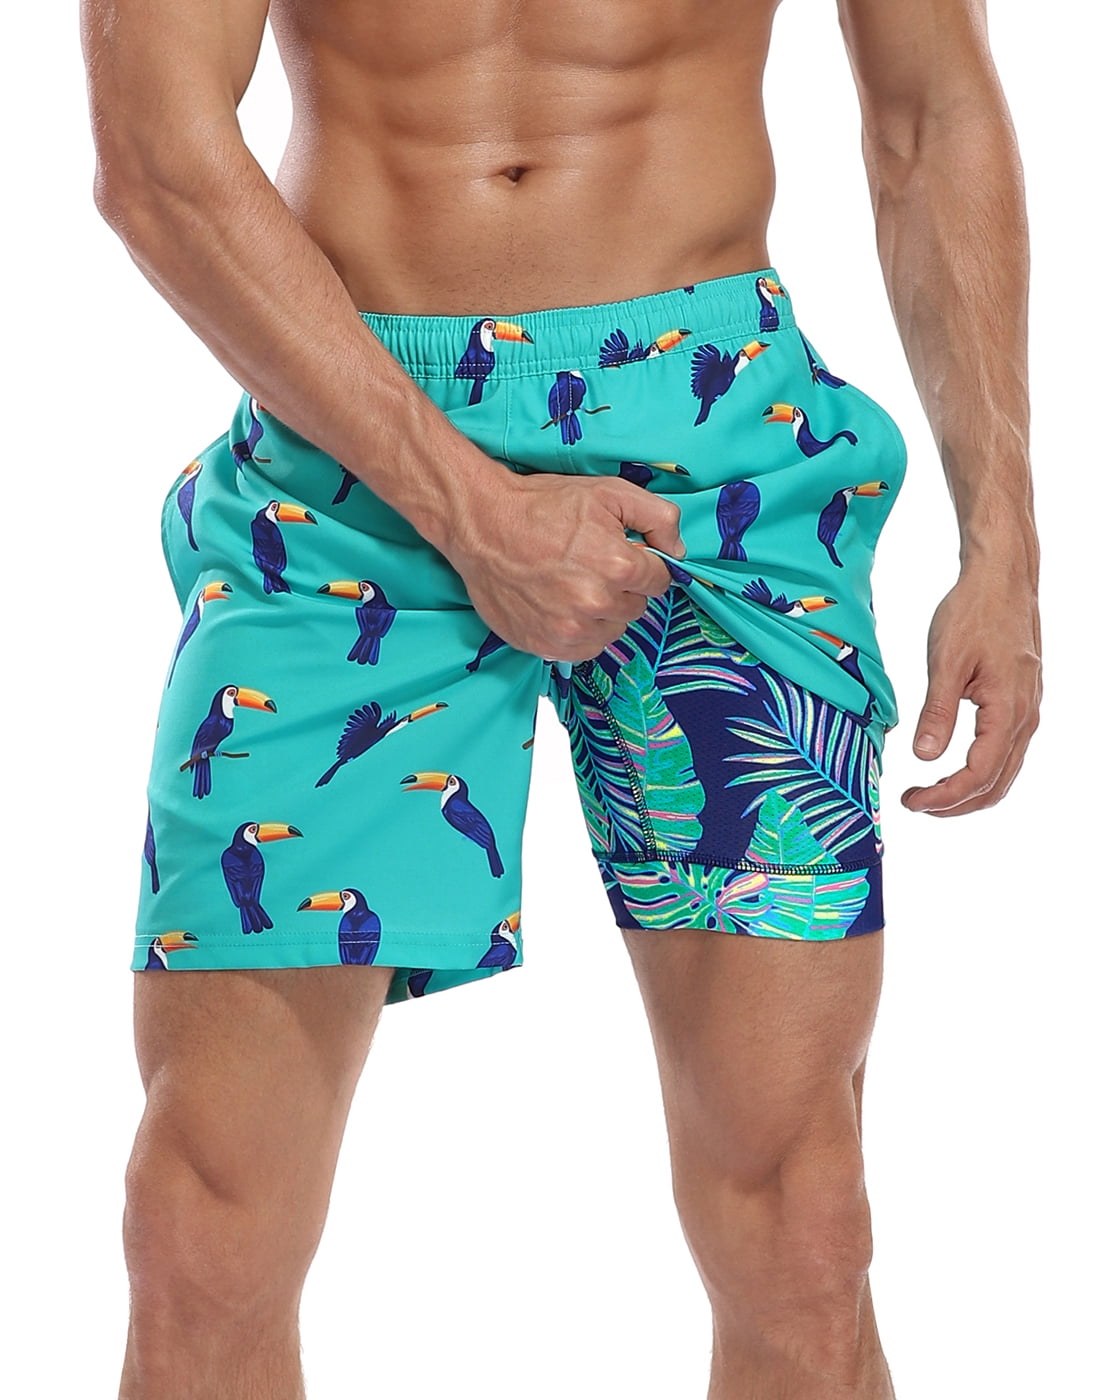 LRD Men's Swim Trunks with Compression Liner 7 Inch Inseam Toucan ...